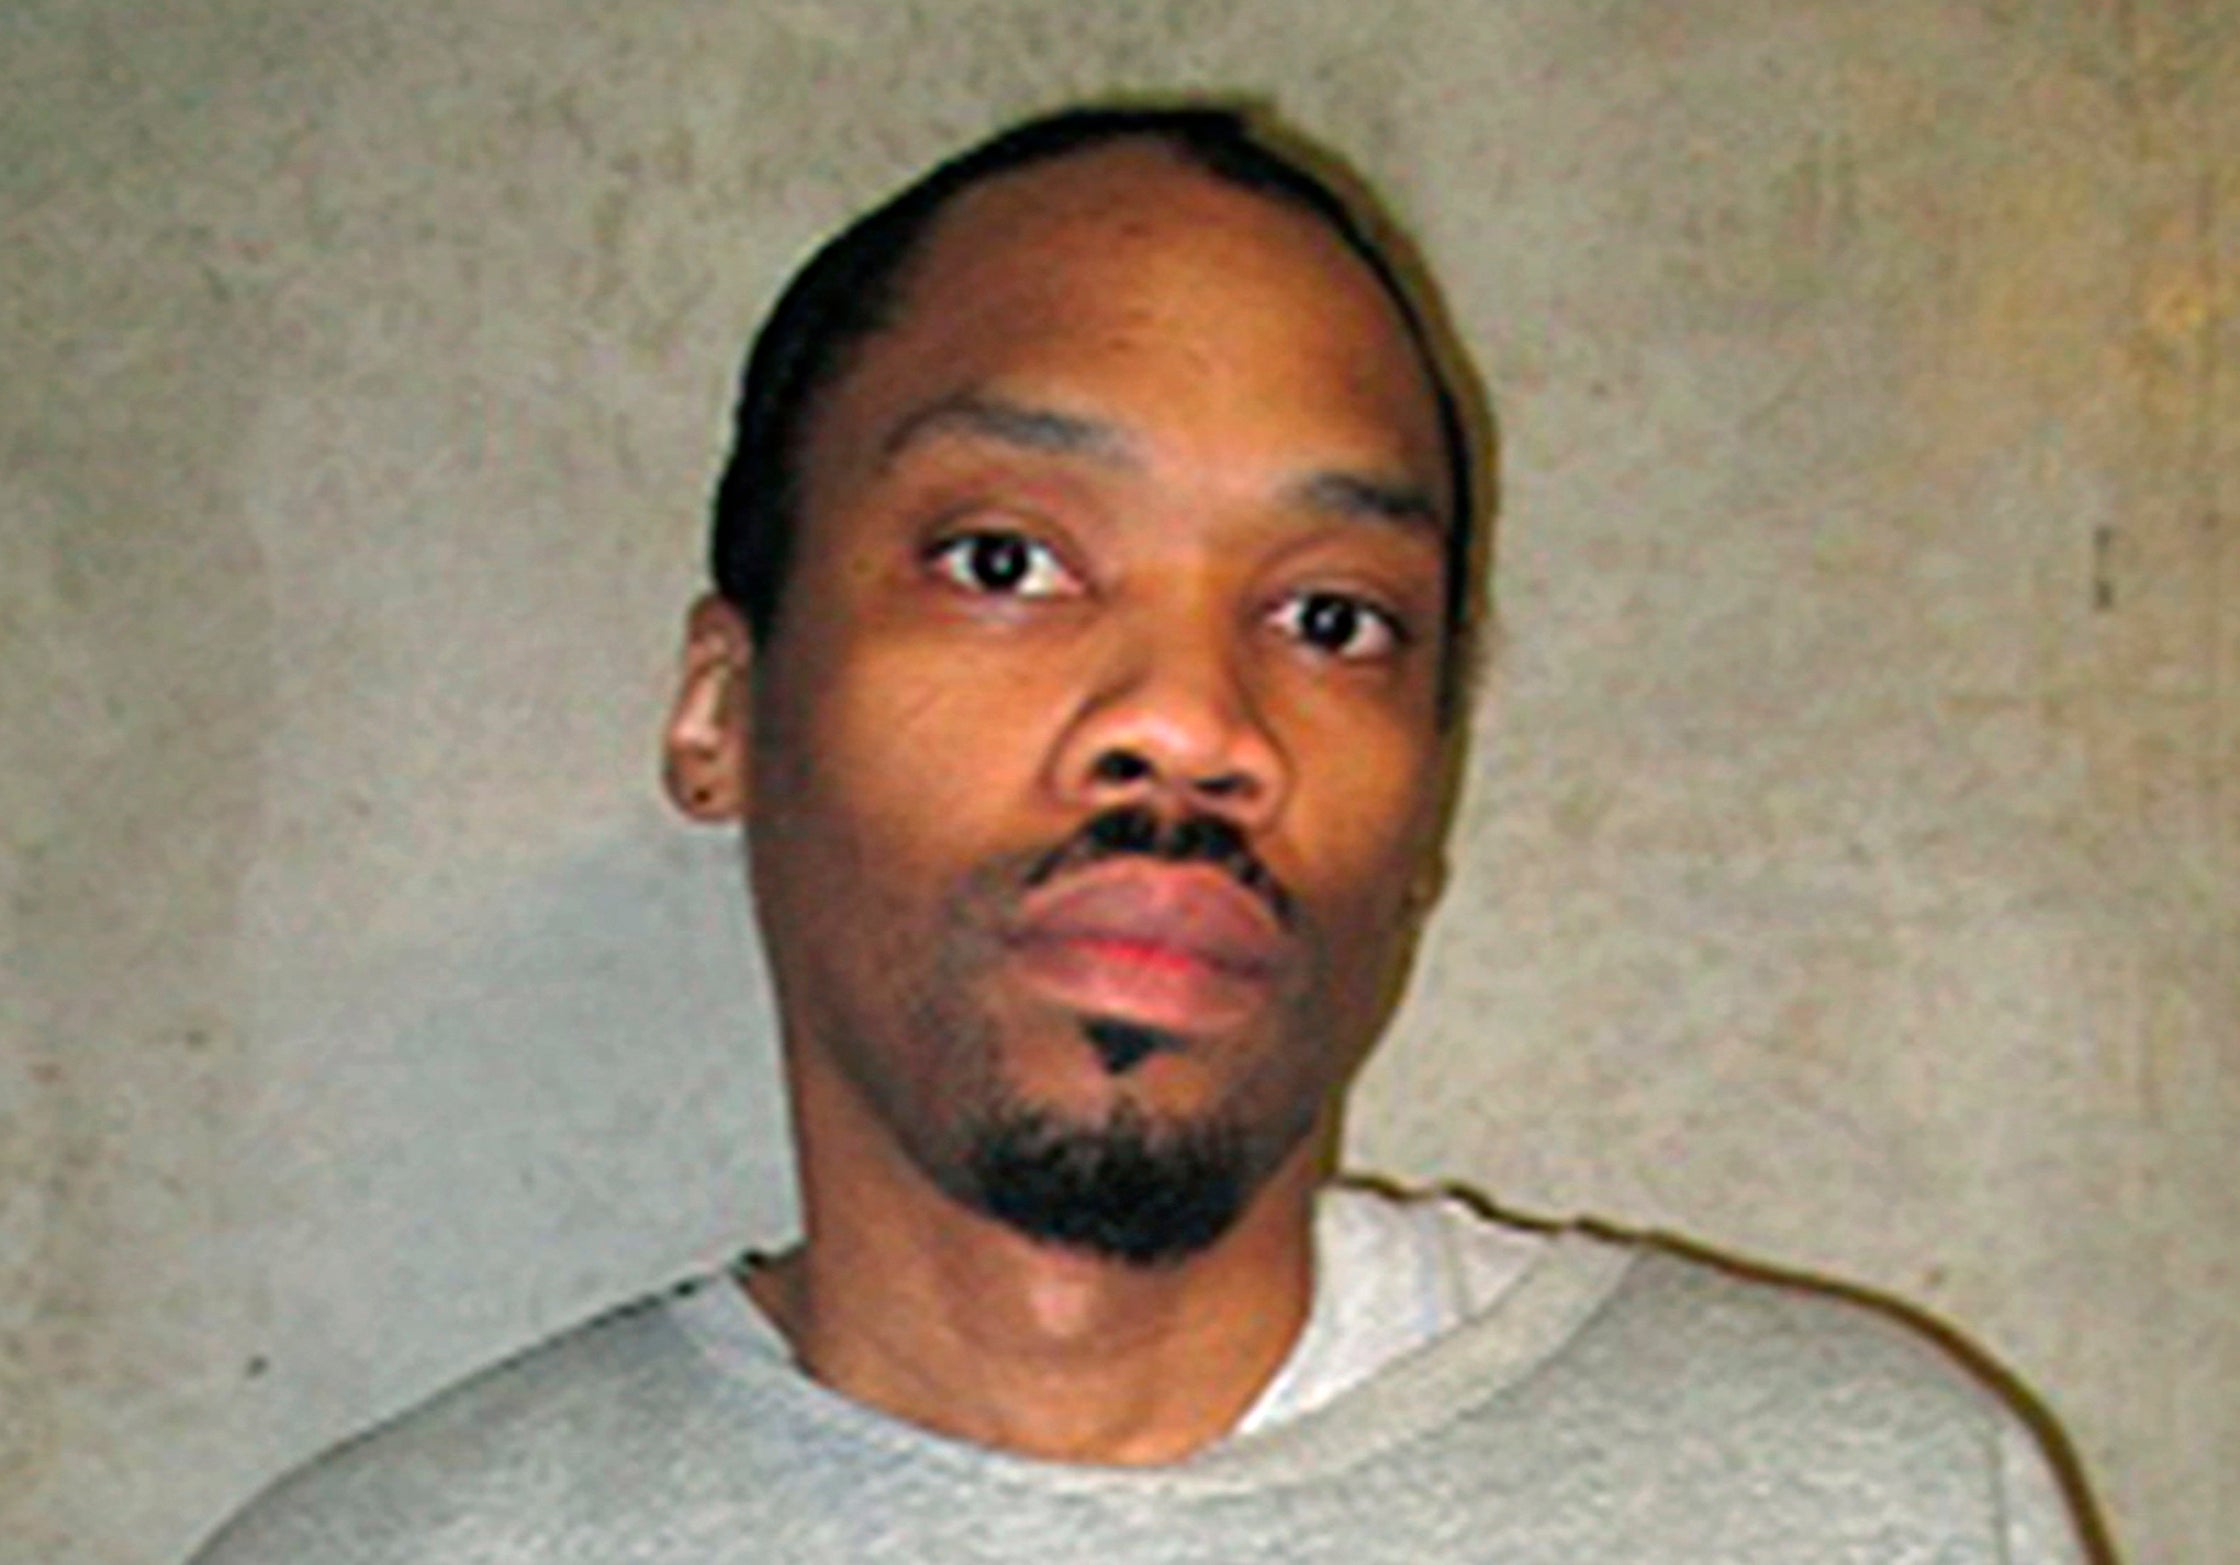 A federal appeals court on Friday declined to halt the execution of Oklahoma death row inmate Julius Jones.